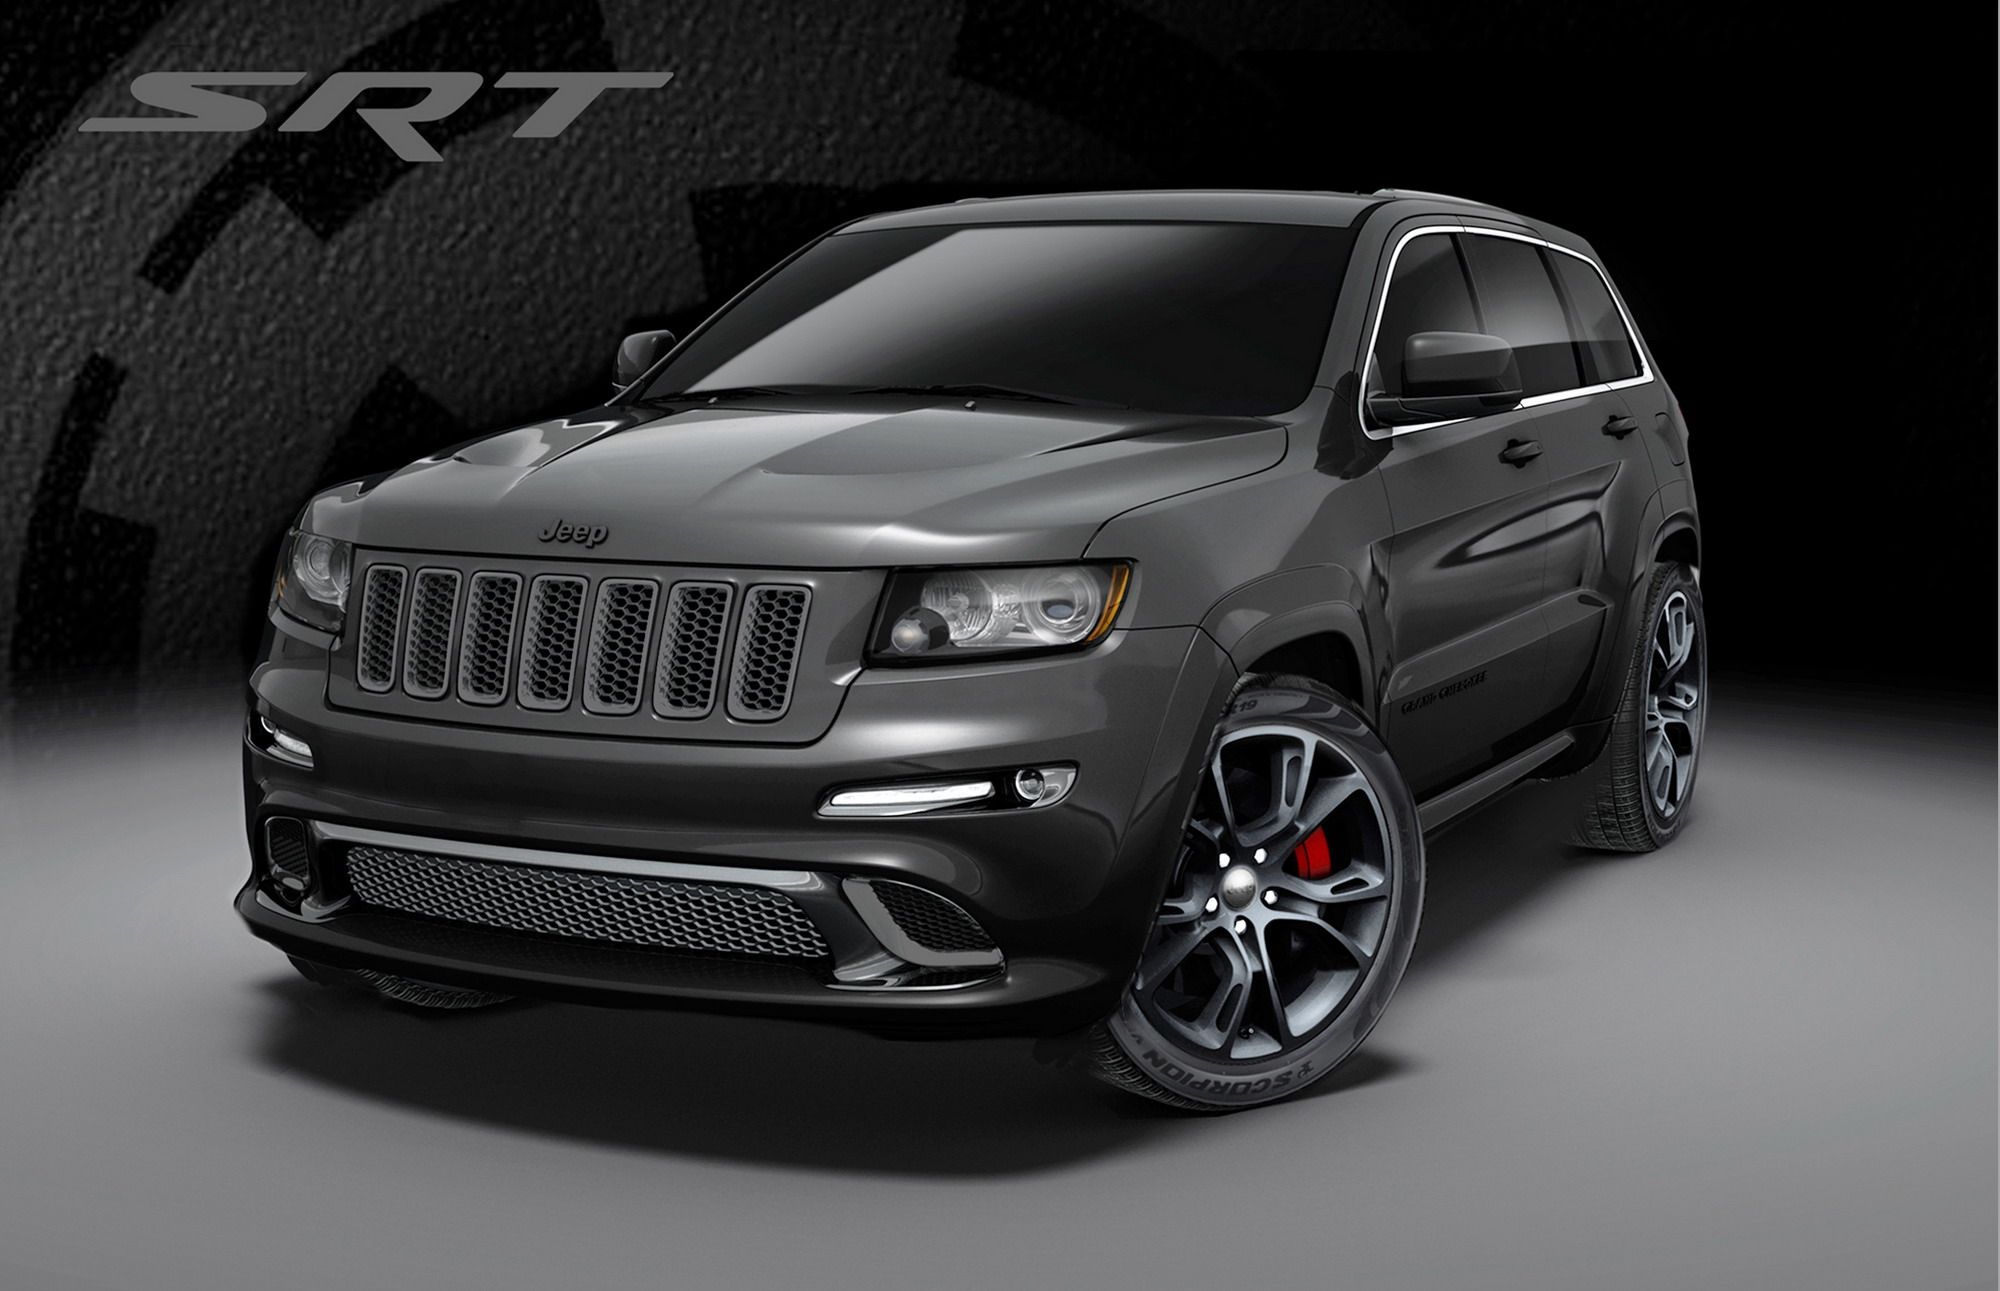 Jeep Grand Cherokee SRT8 Alpine And Vapor Editions Picture, Photo, Wallpaper